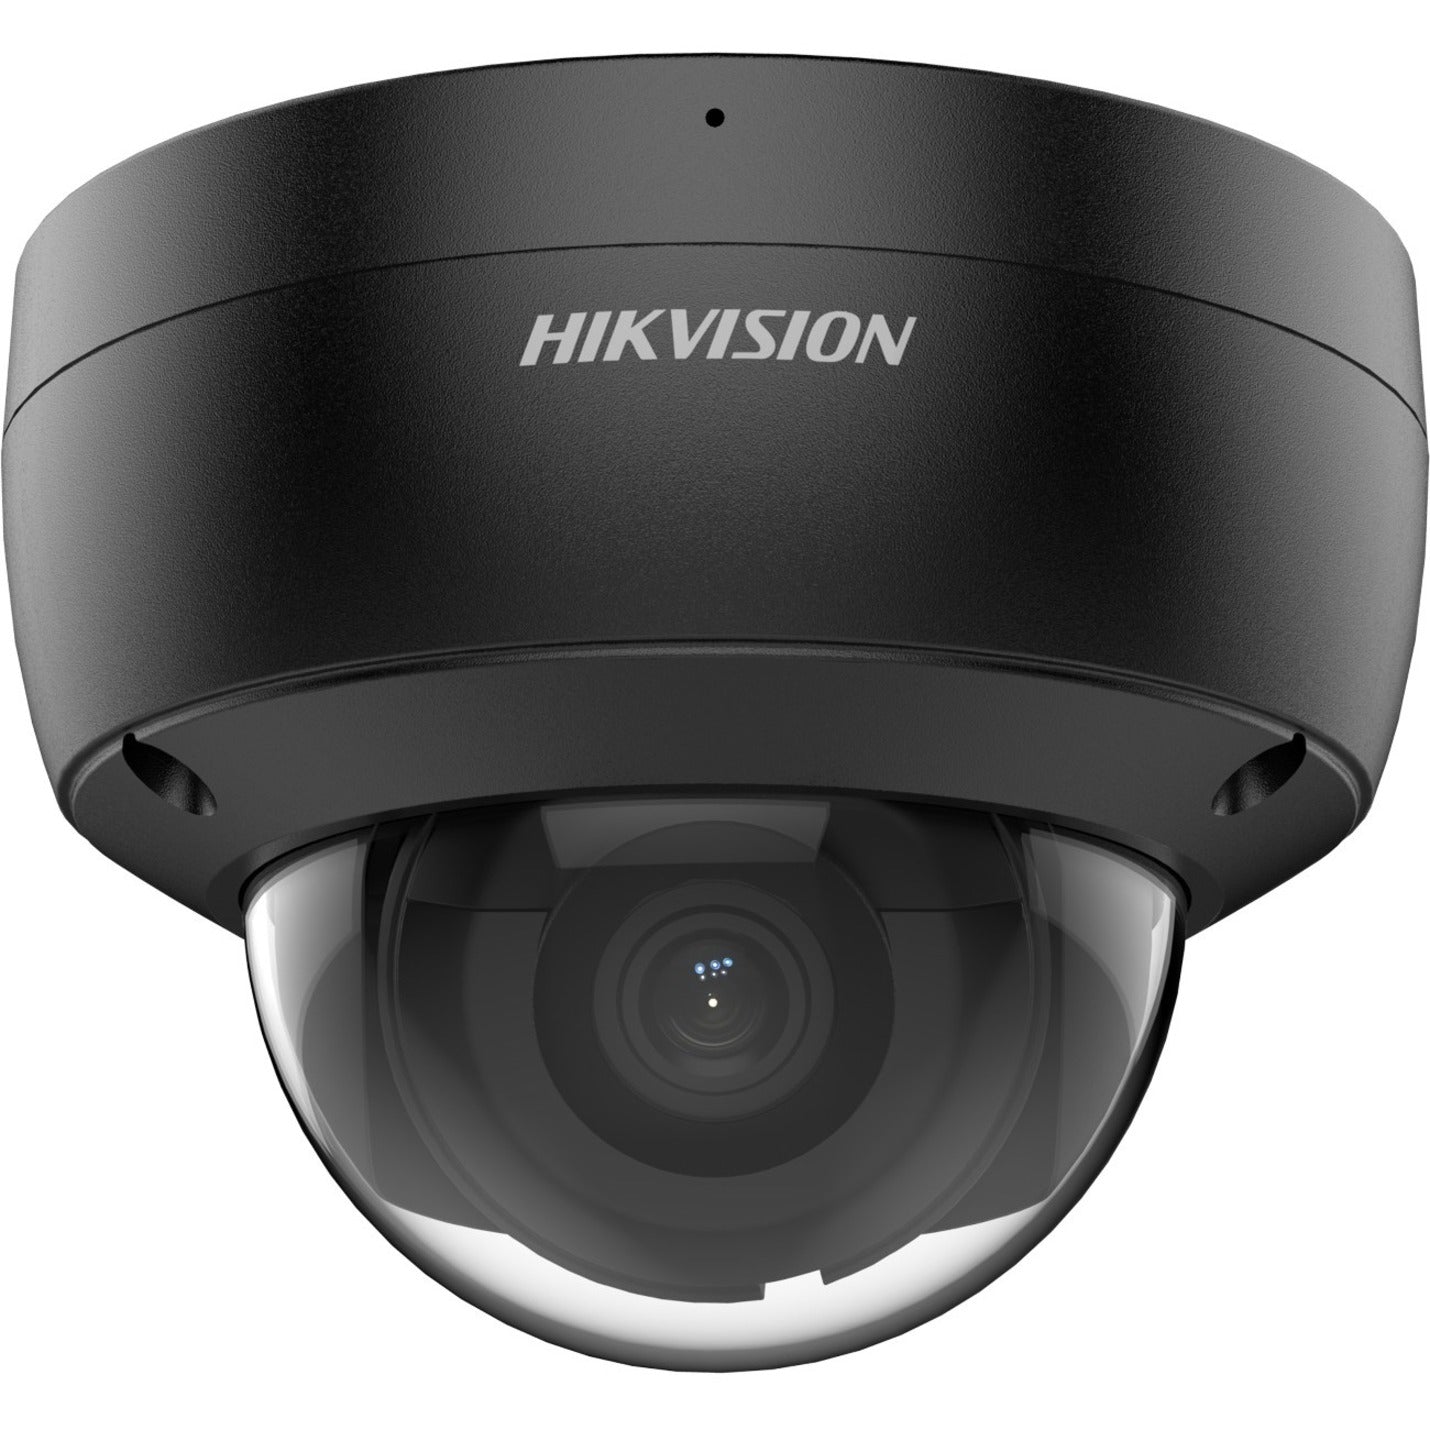 Hikvision DS-2CD2123G2-IU 4MM EasyIP 2 MP Vandal Built-in Mic Fixed Dome Network Camera, D/N IR 2MP 4mm 84